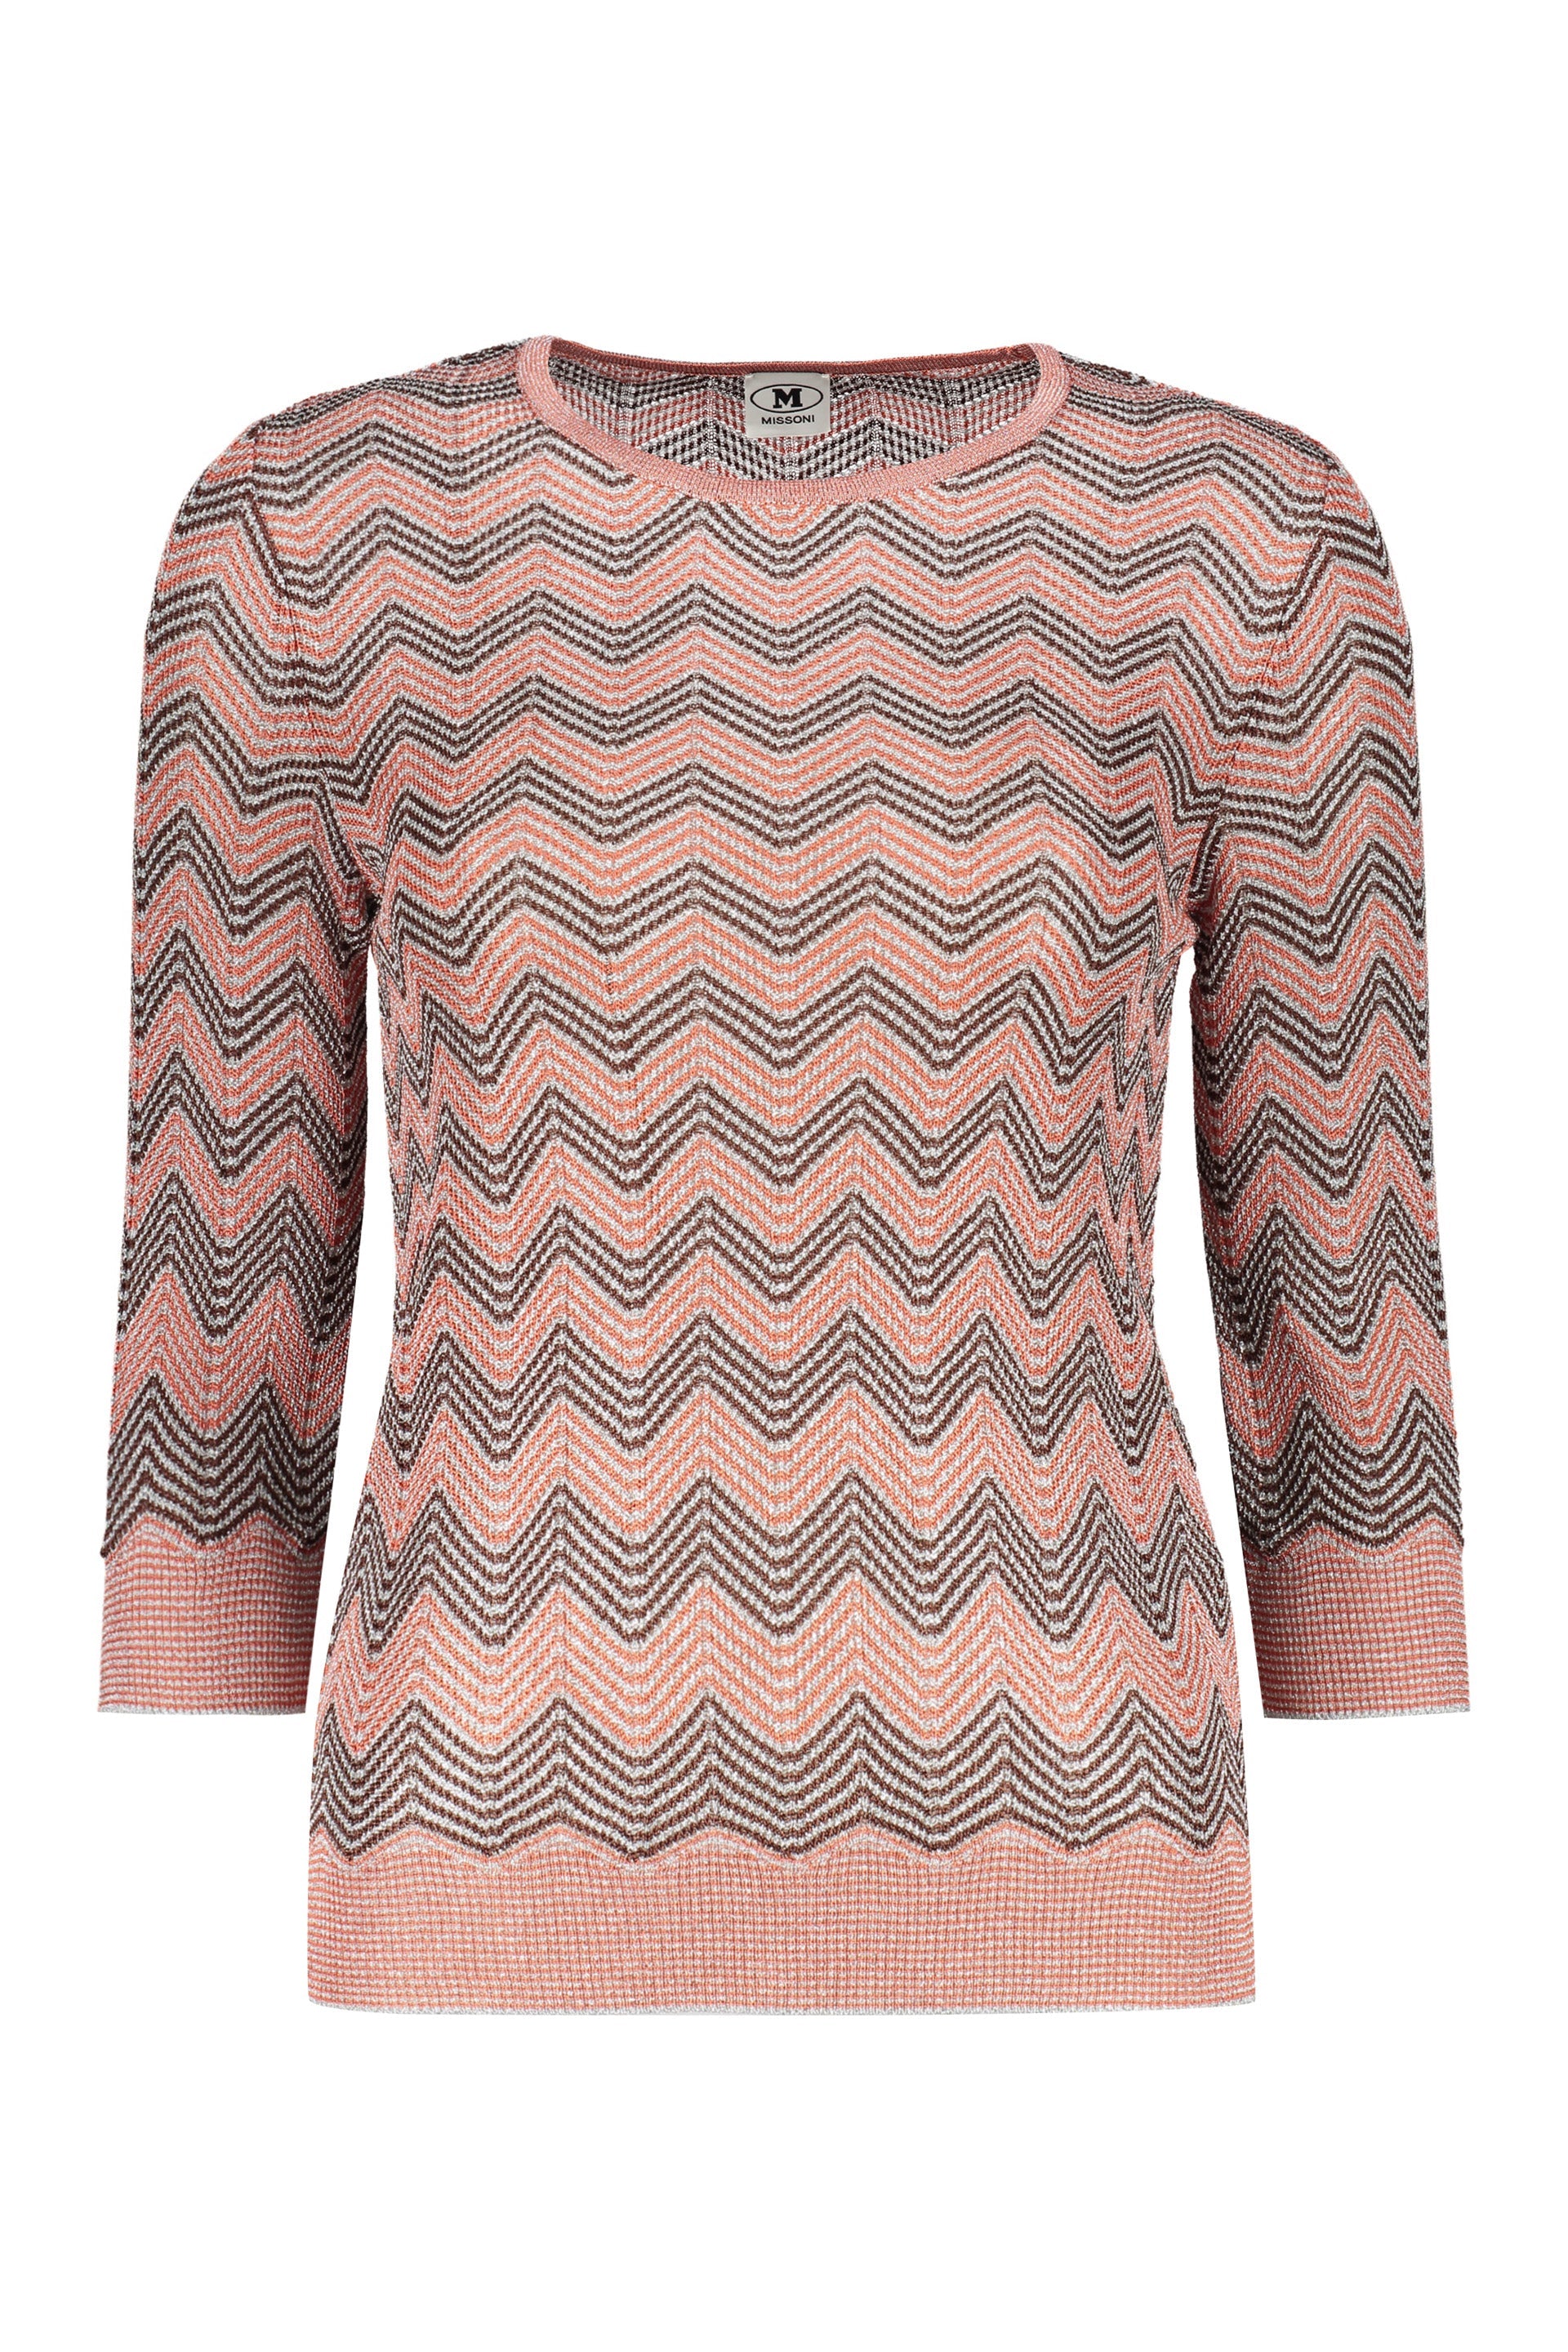 Missoni-OUTLET-SALE-Knitted-top-Shirts-L-ARCHIVE-COLLECTION_ceabb506-536f-4a50-8b30-e378befcf001.jpg